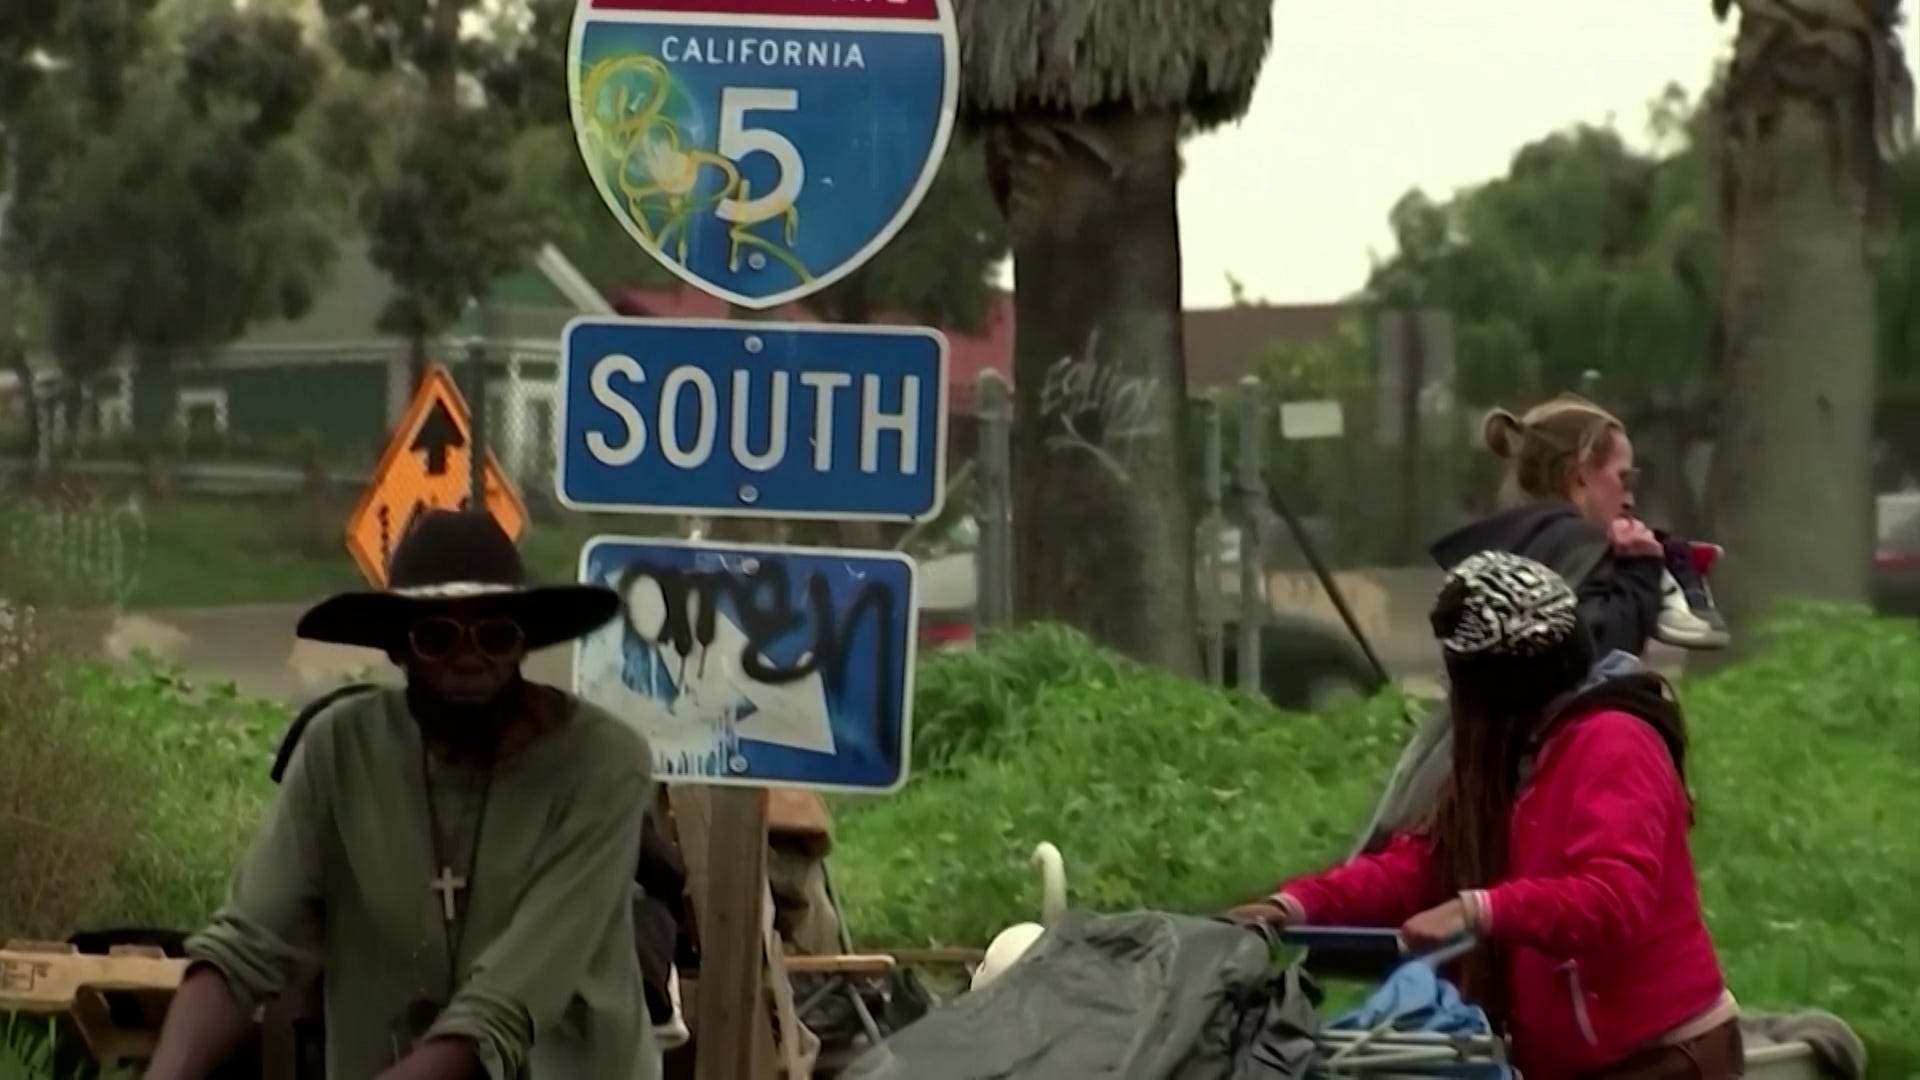 Newsom’s push to enforce anti-camping laws repeats California’s past mistakes on homelessness